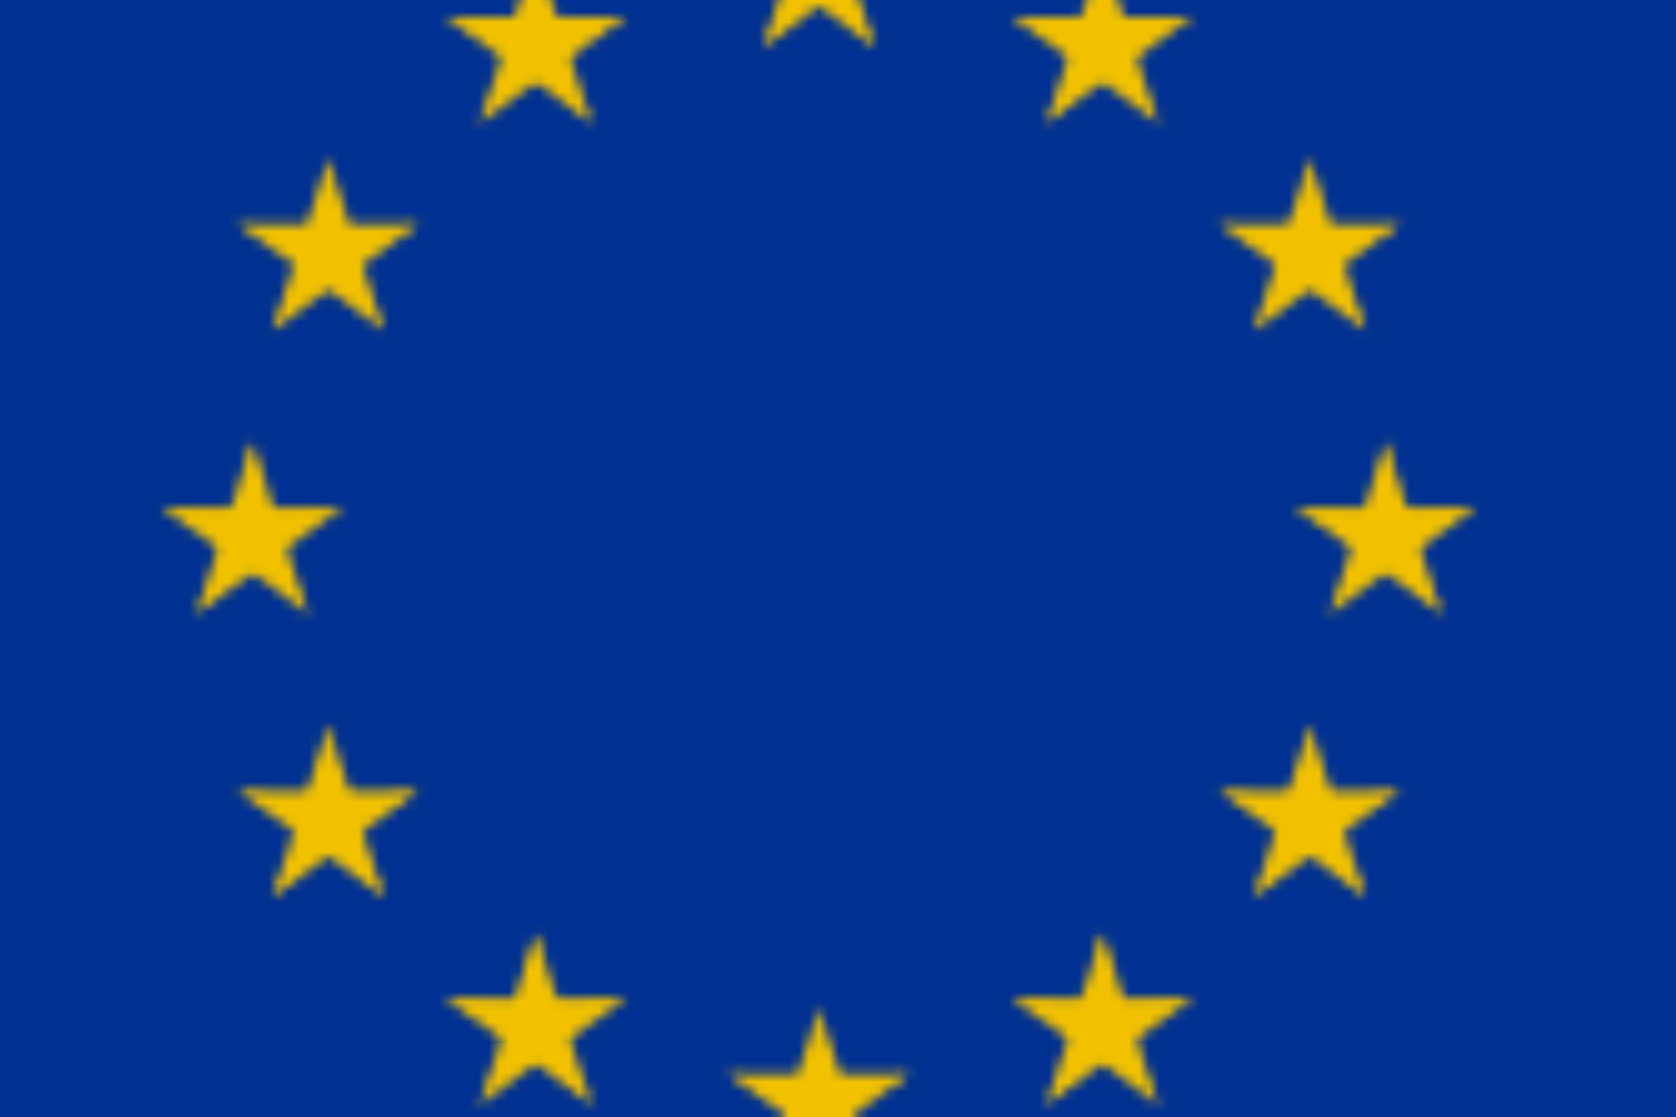 European flags and historical figures